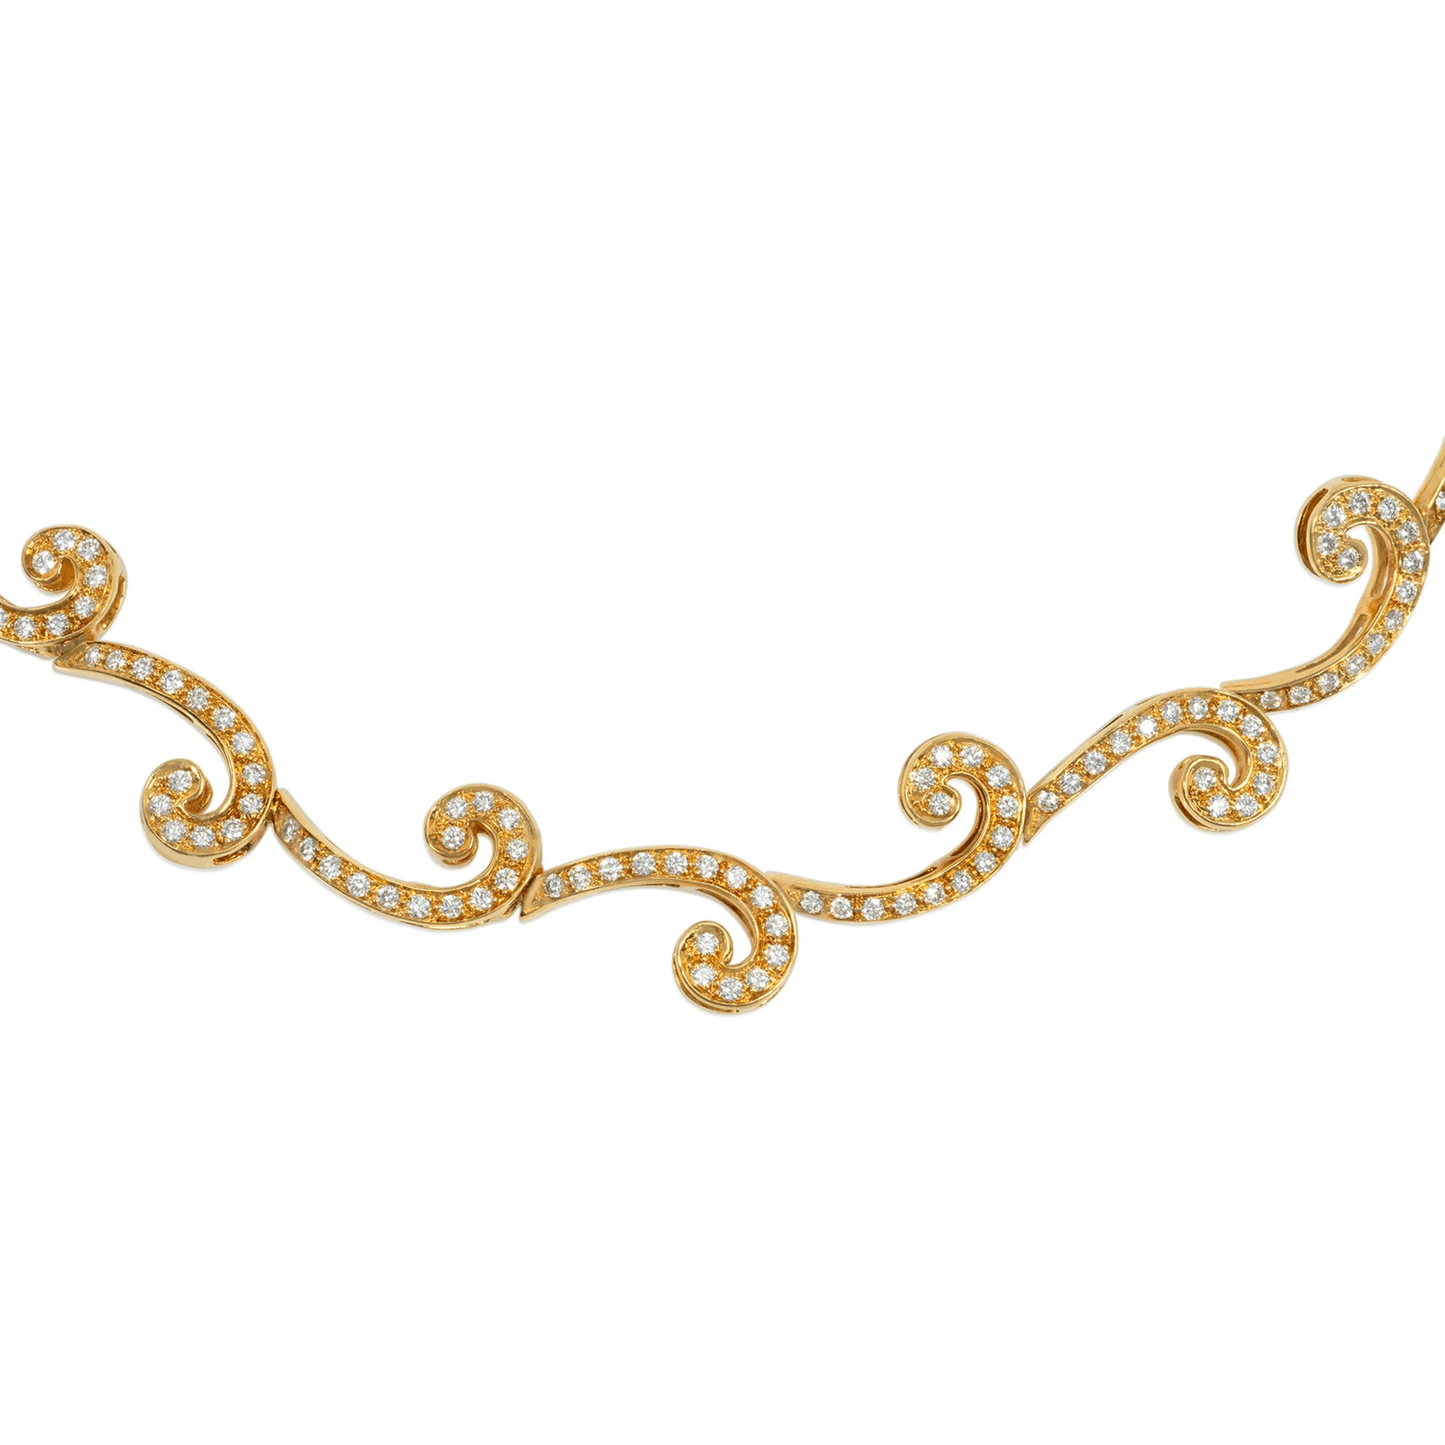 1960s 18KT Yellow Gold Diamond Necklace close-up